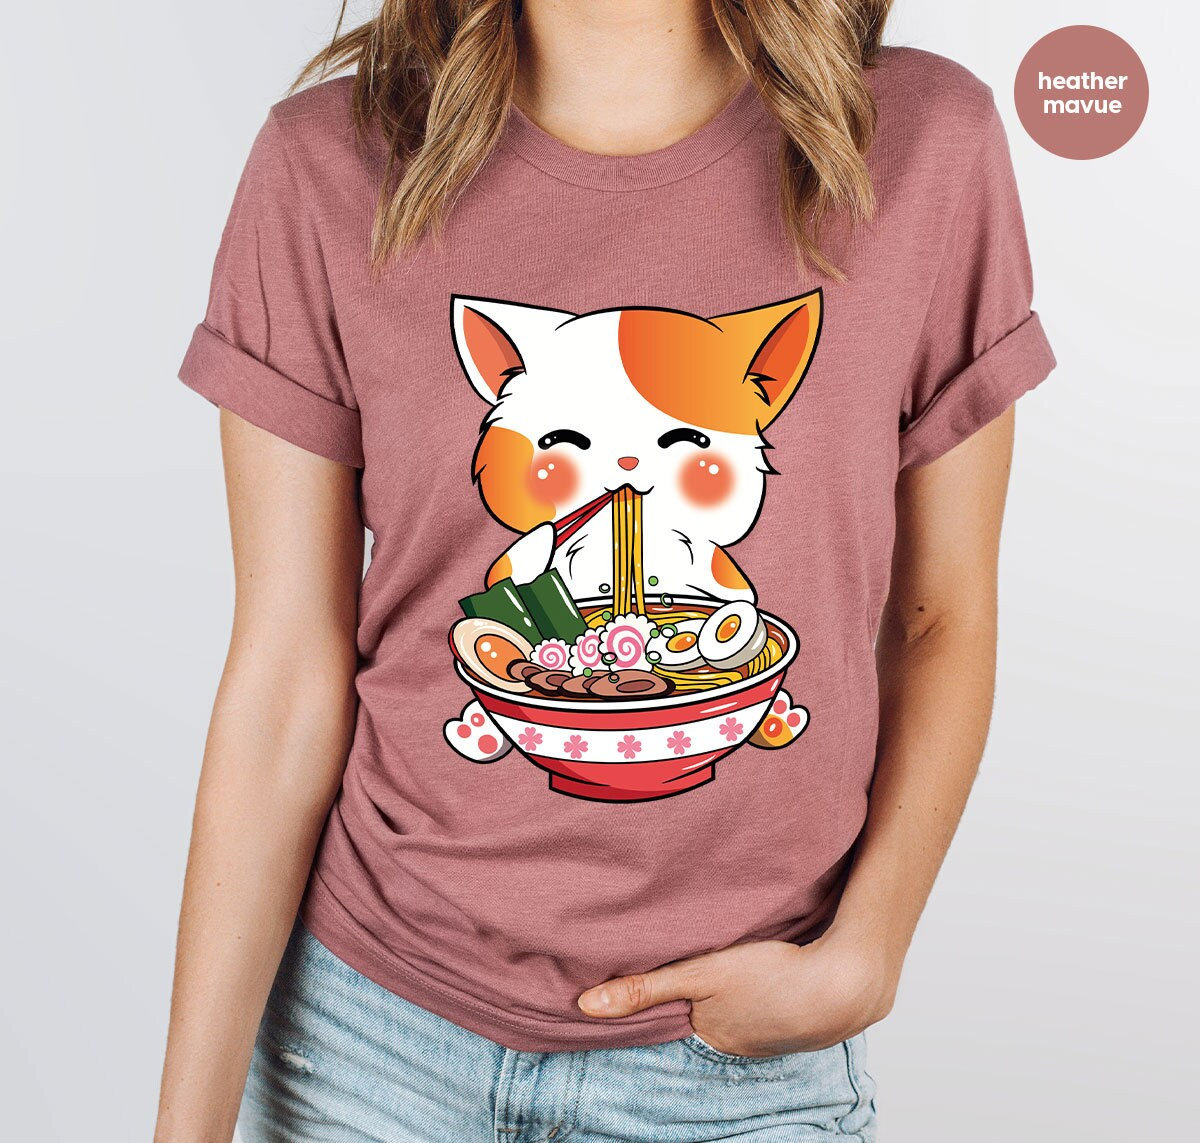 Set Of Three Kawaii Cute Fat White Cats In Different Poses Vector Anime  Japanese Style Illustration Readymade Print For T Shirt Endproduct With  Lettering Fallow Music Food Sleep Stock Illustration - Download